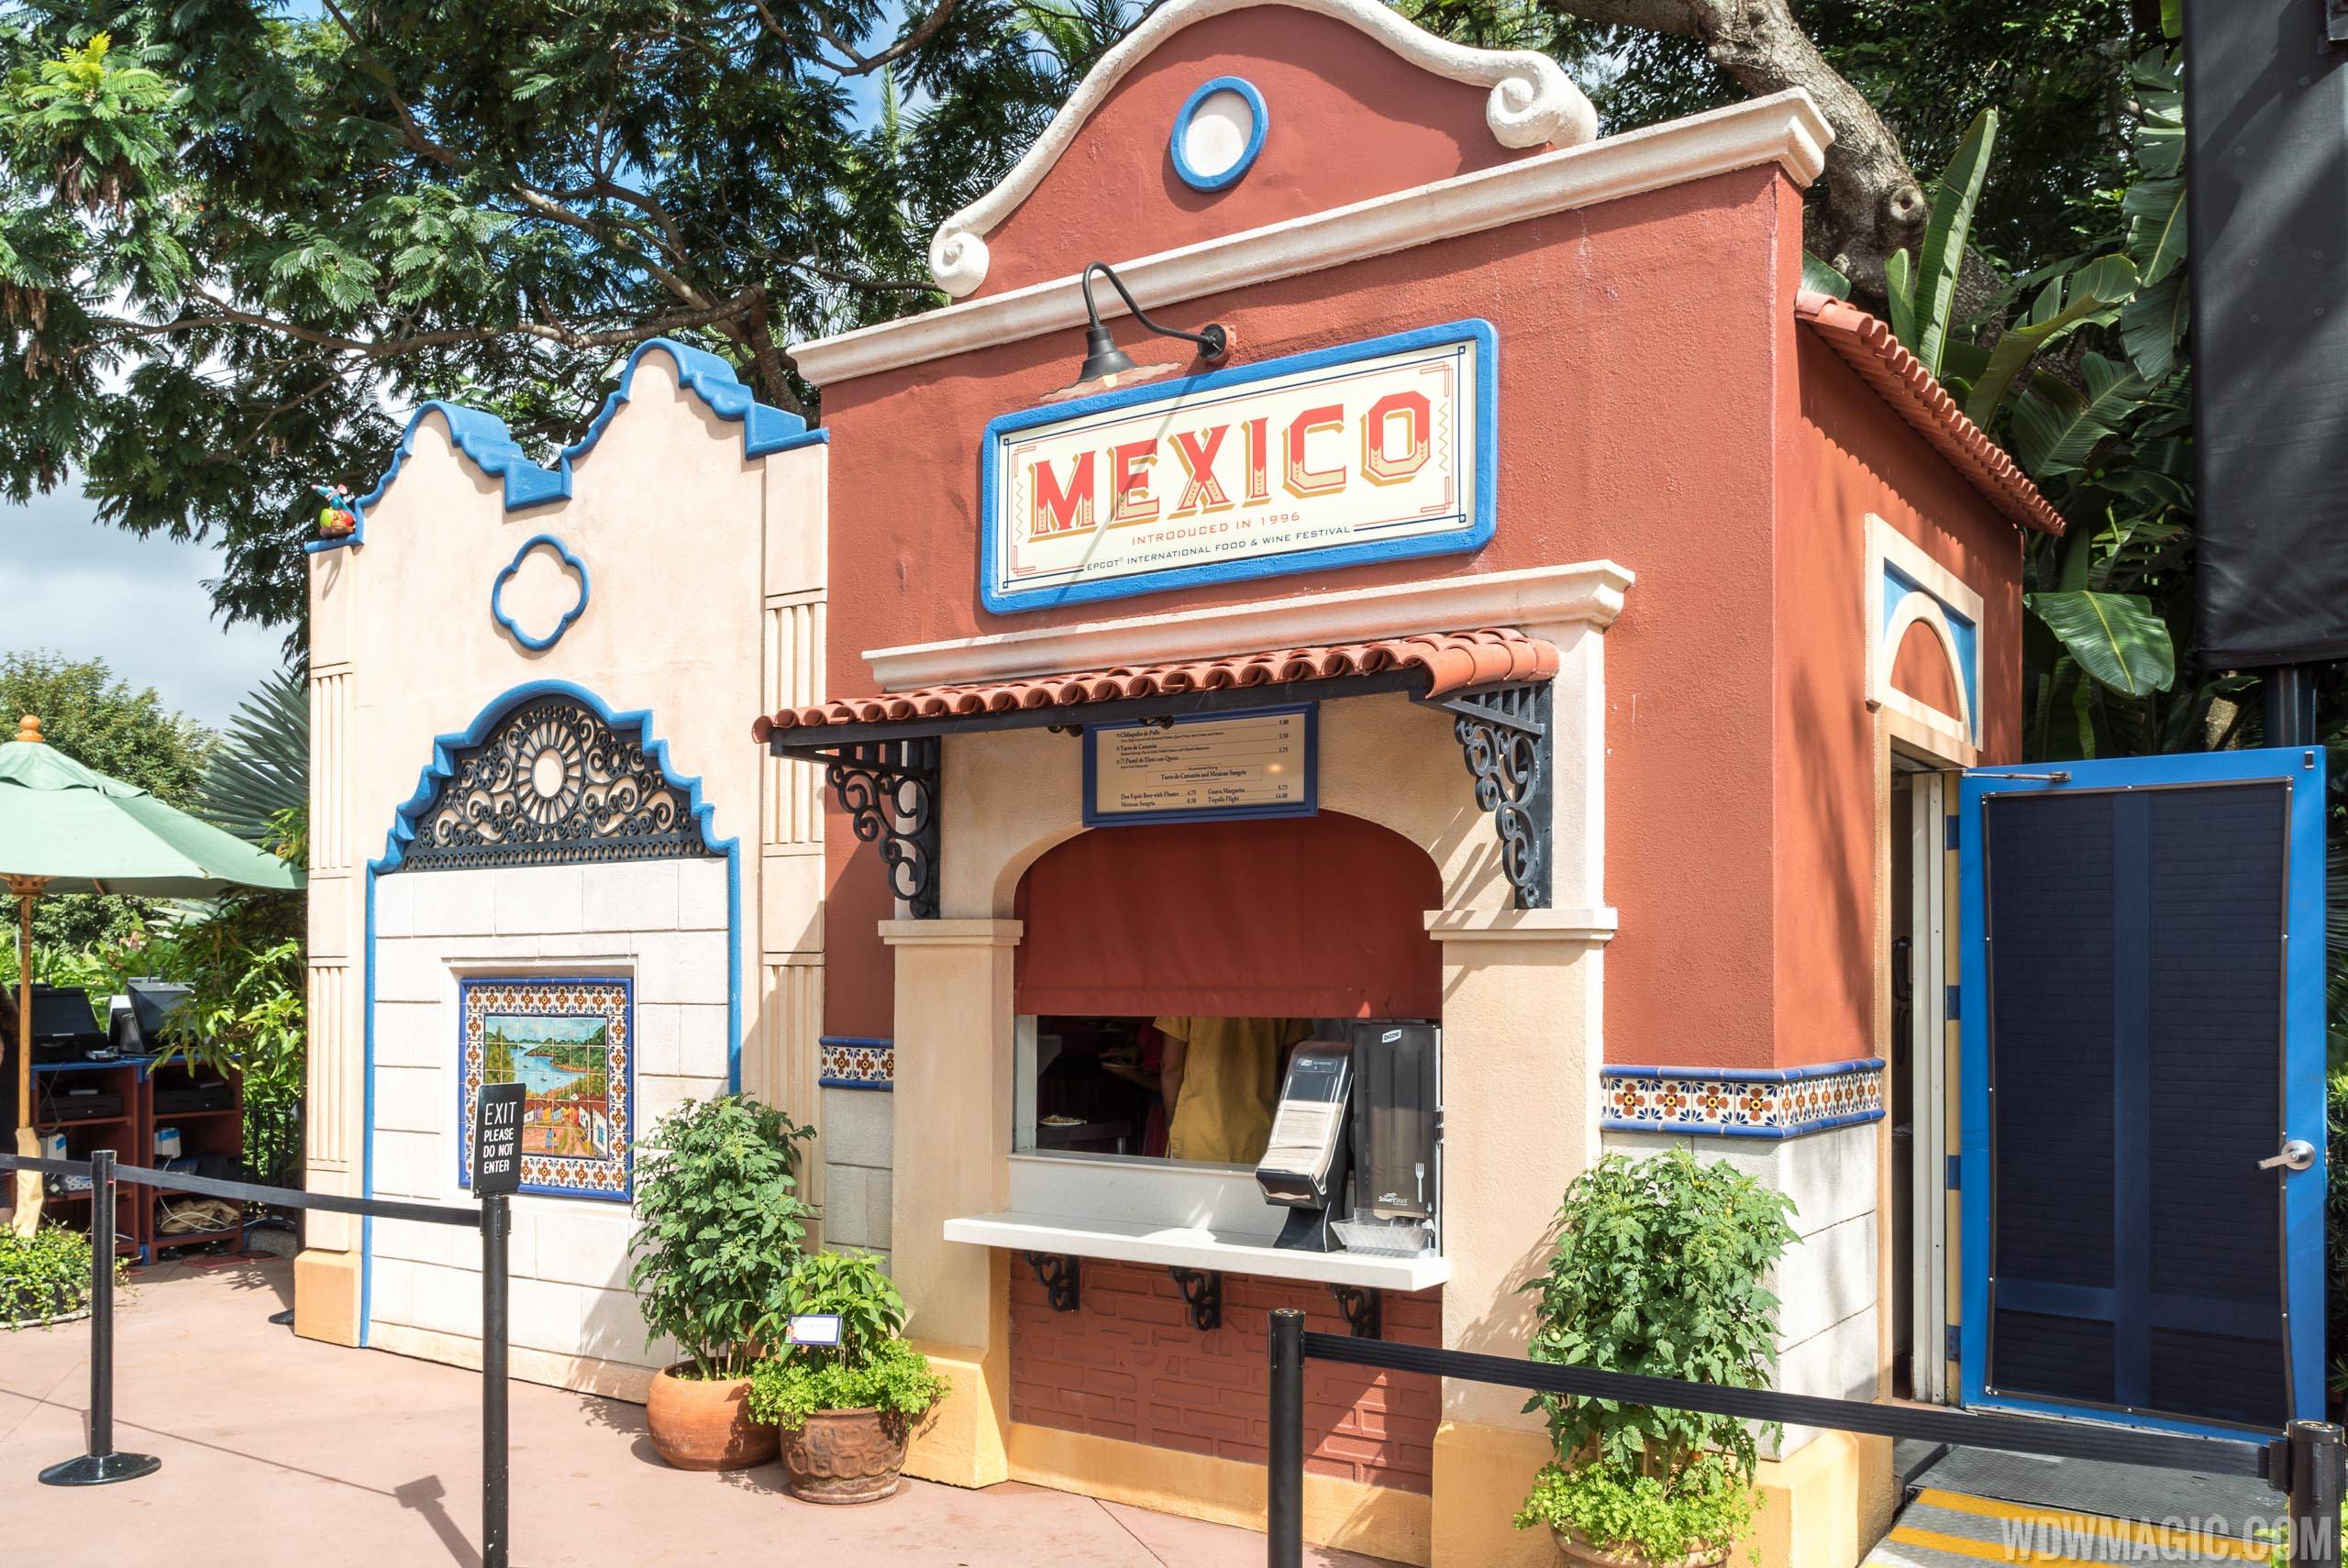 2015 Epcot Food and Wine Festival Marketplace kiosk - Mexico